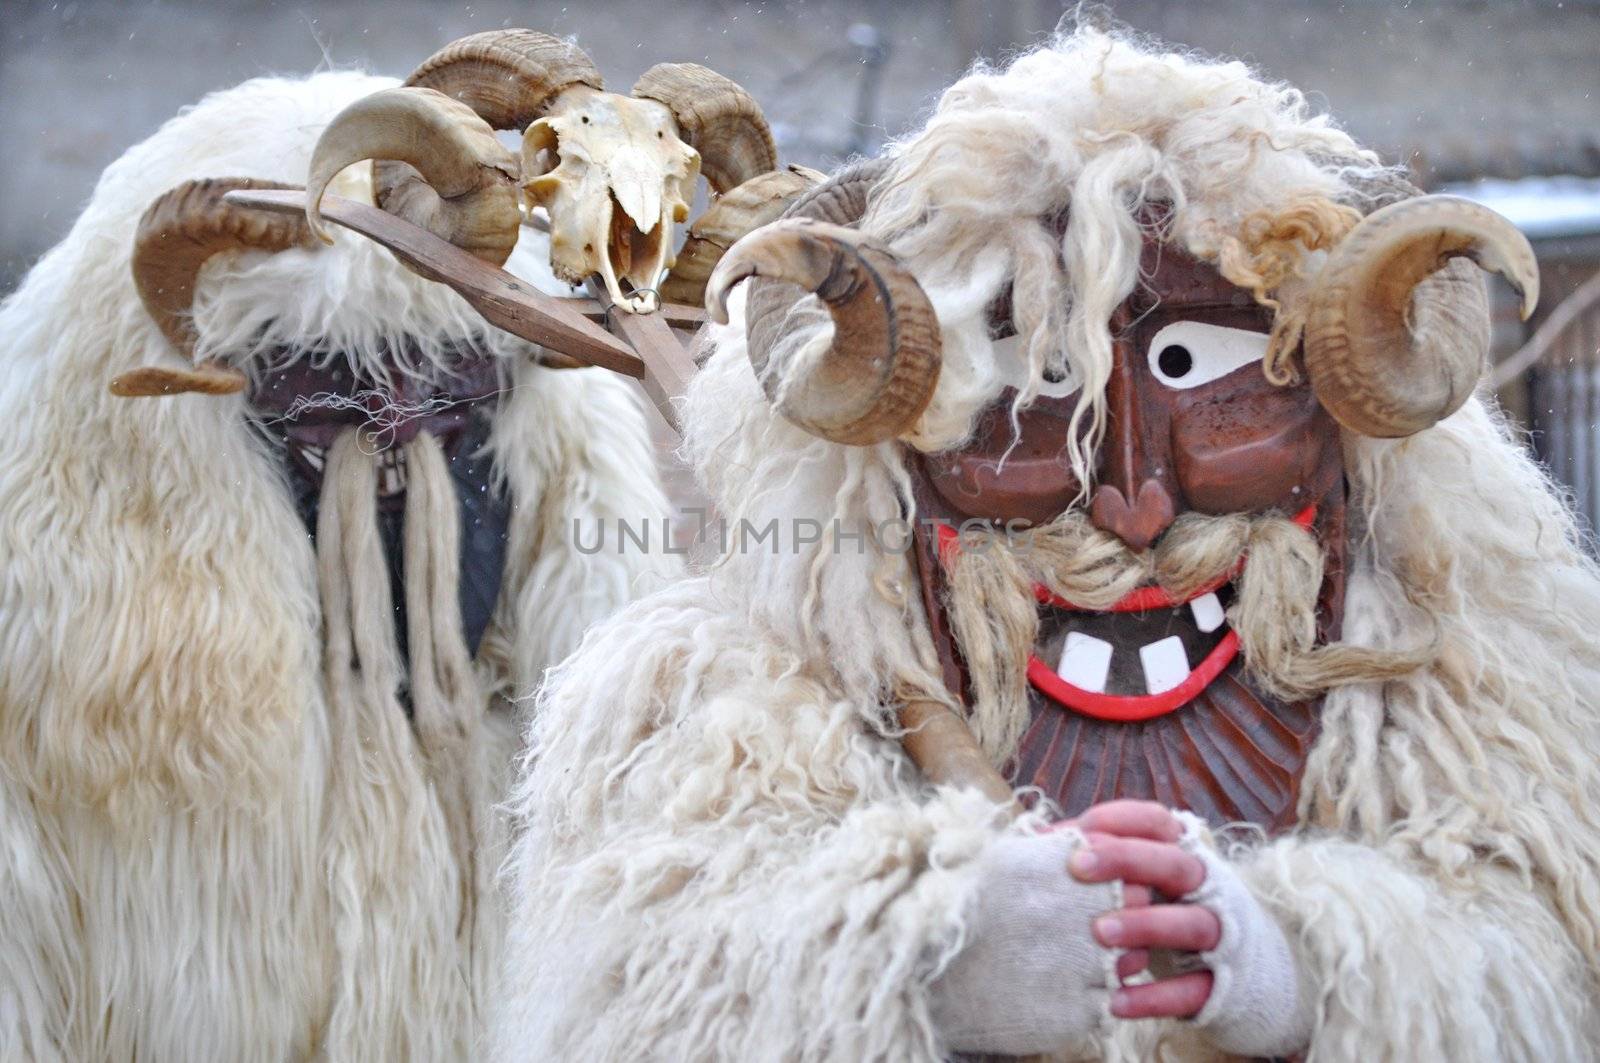 MOHACS, HUNGARY - MARCH 10: Unidentified people in mask at the Mohacsi Busojaras. It is an  annual festival to welcome the spring . March 10, 2012 in Mohacs, Hungary.